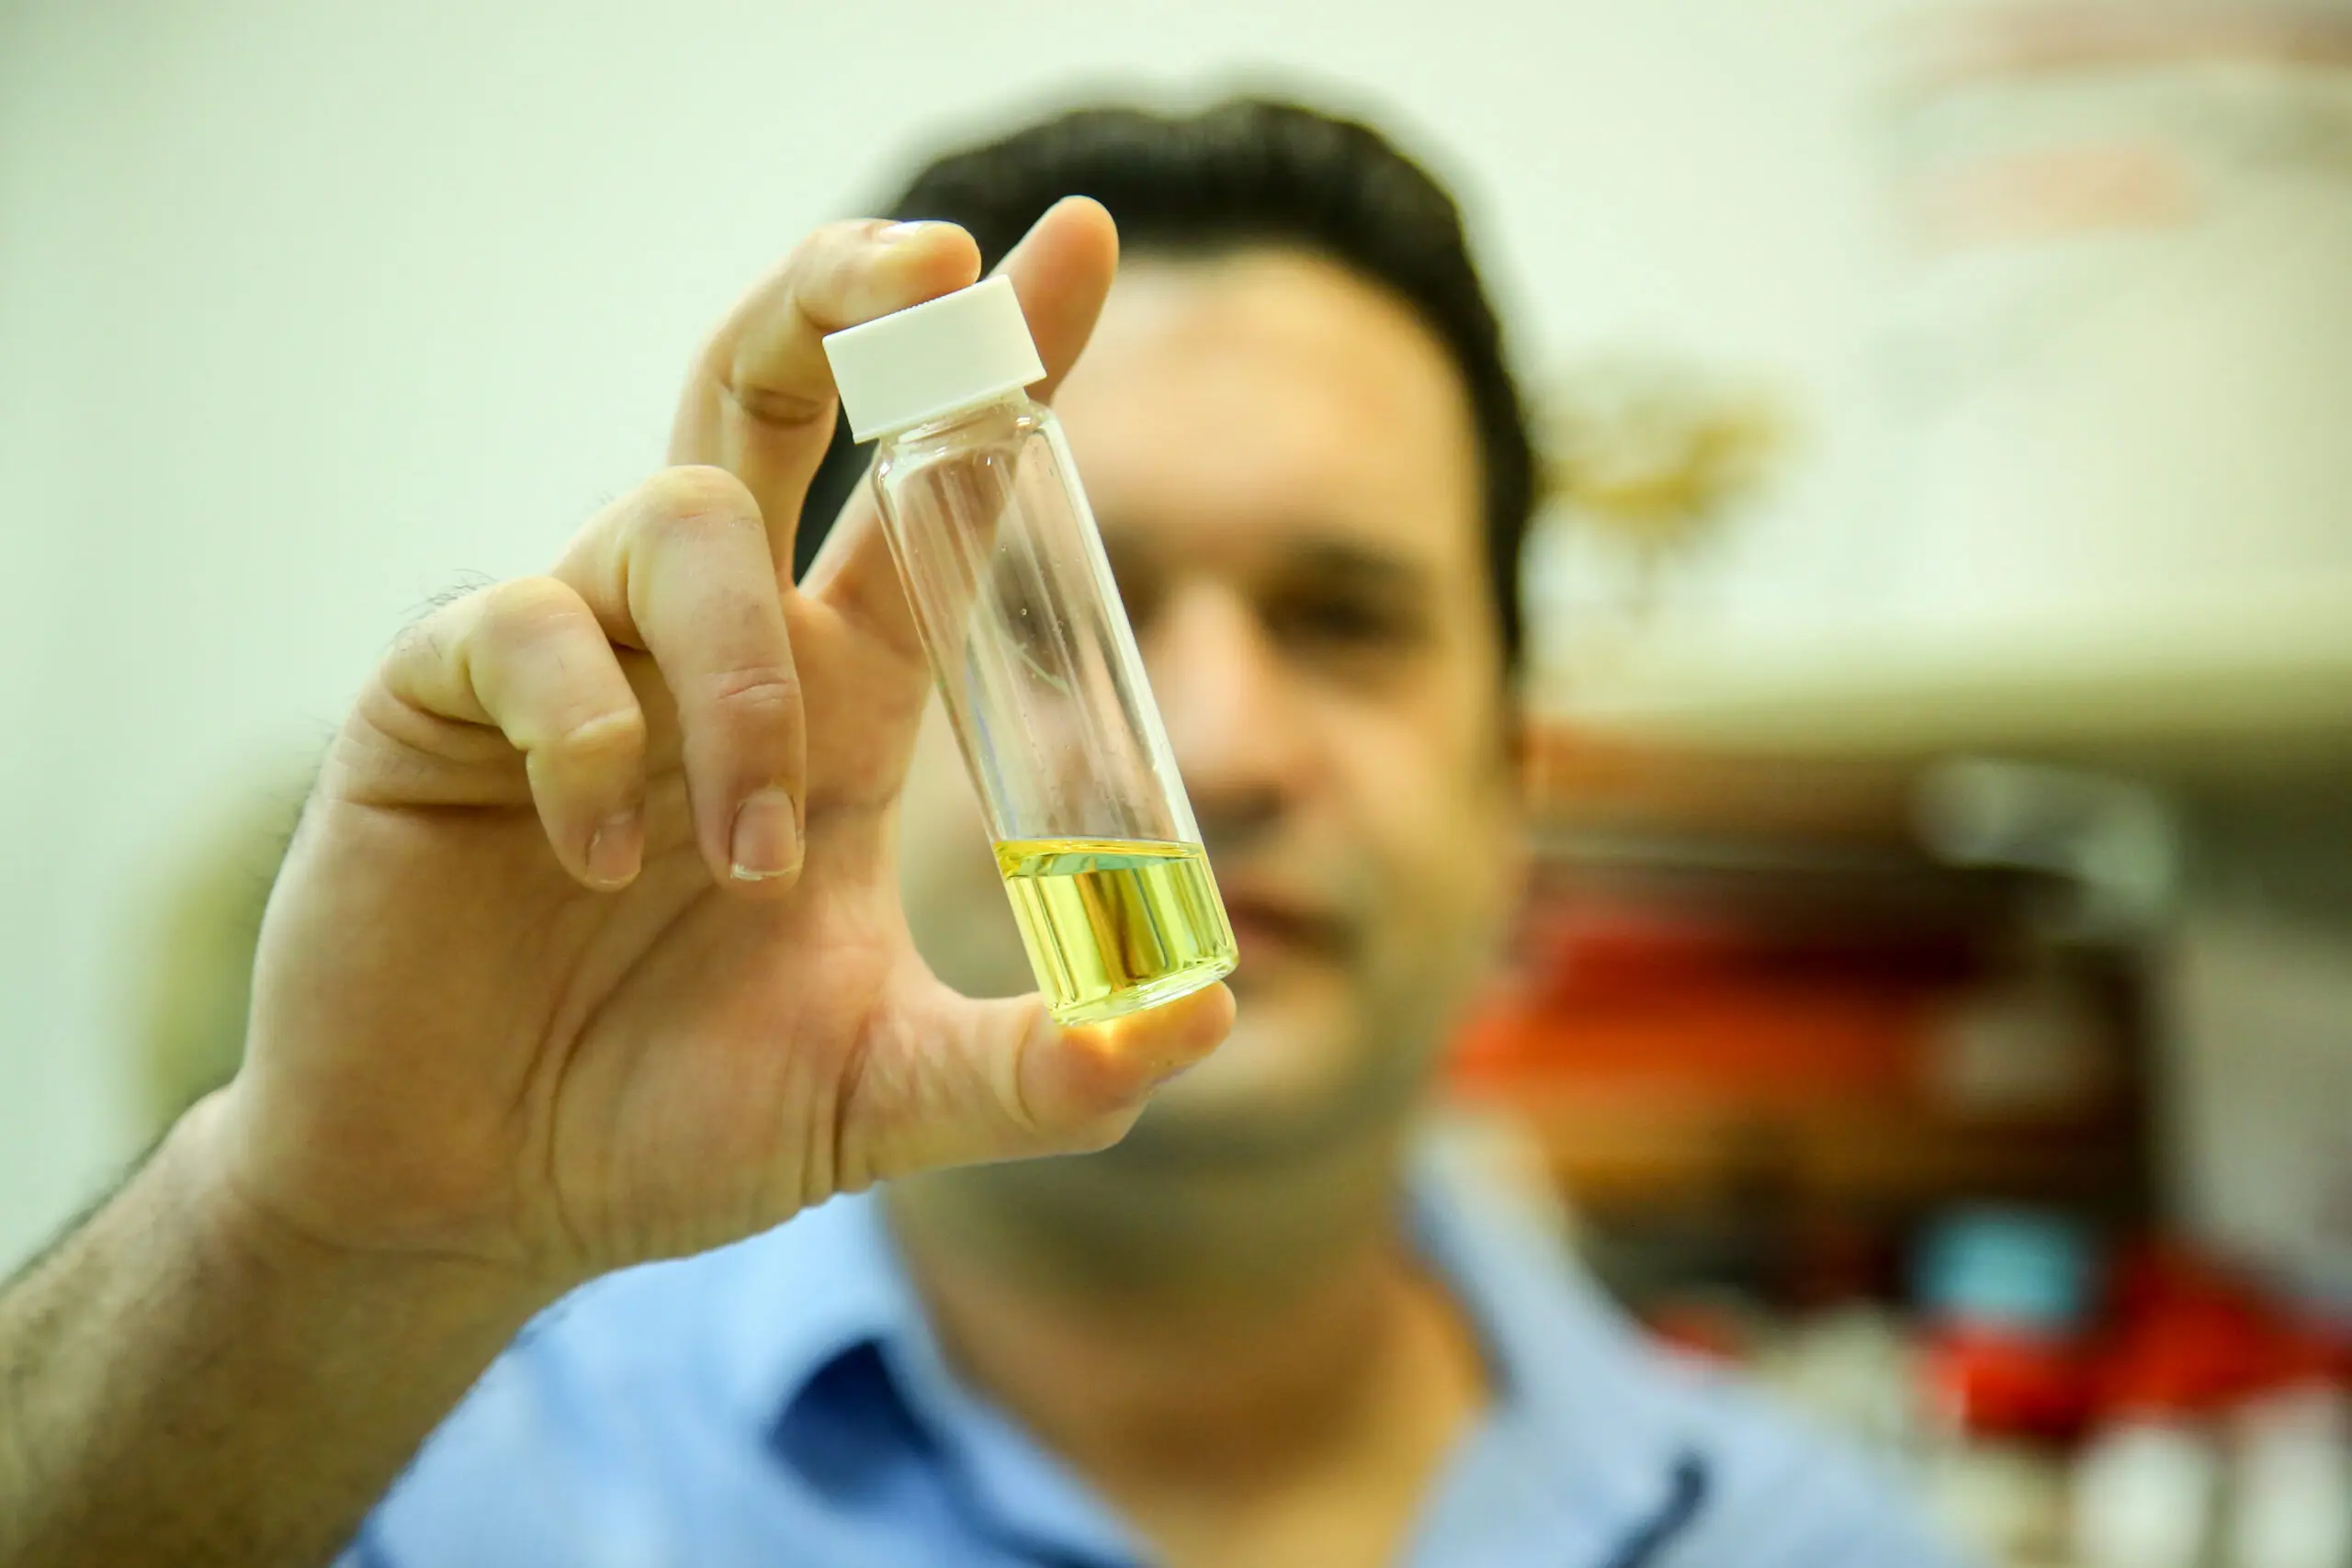 Meet Elad Meller, the scientist-turned-entrepreneur extracting carbon from carbohydrates.